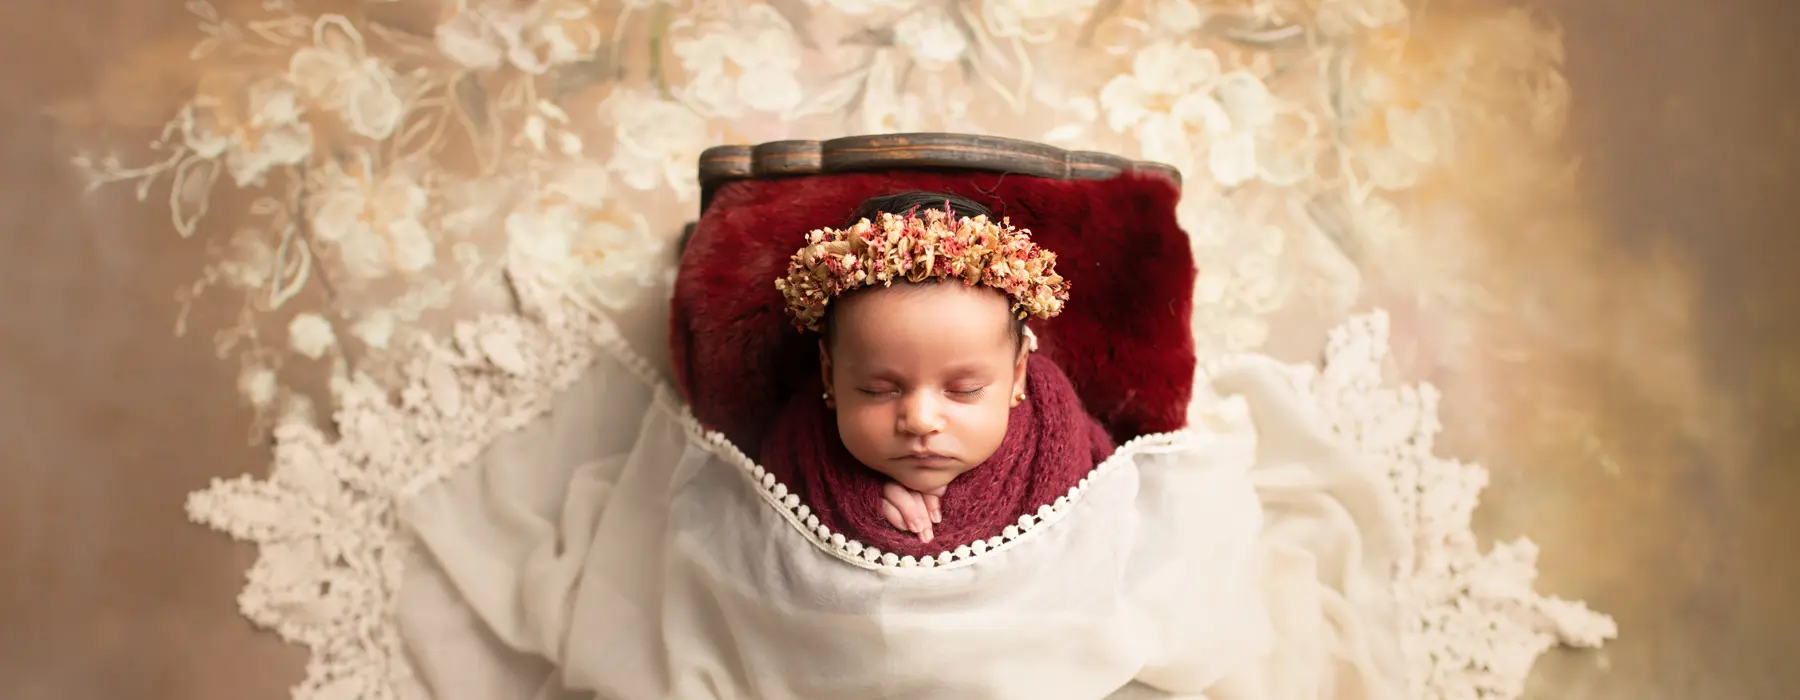 Sony A7IV Quick start guide for Newborn Photographers – Part 1